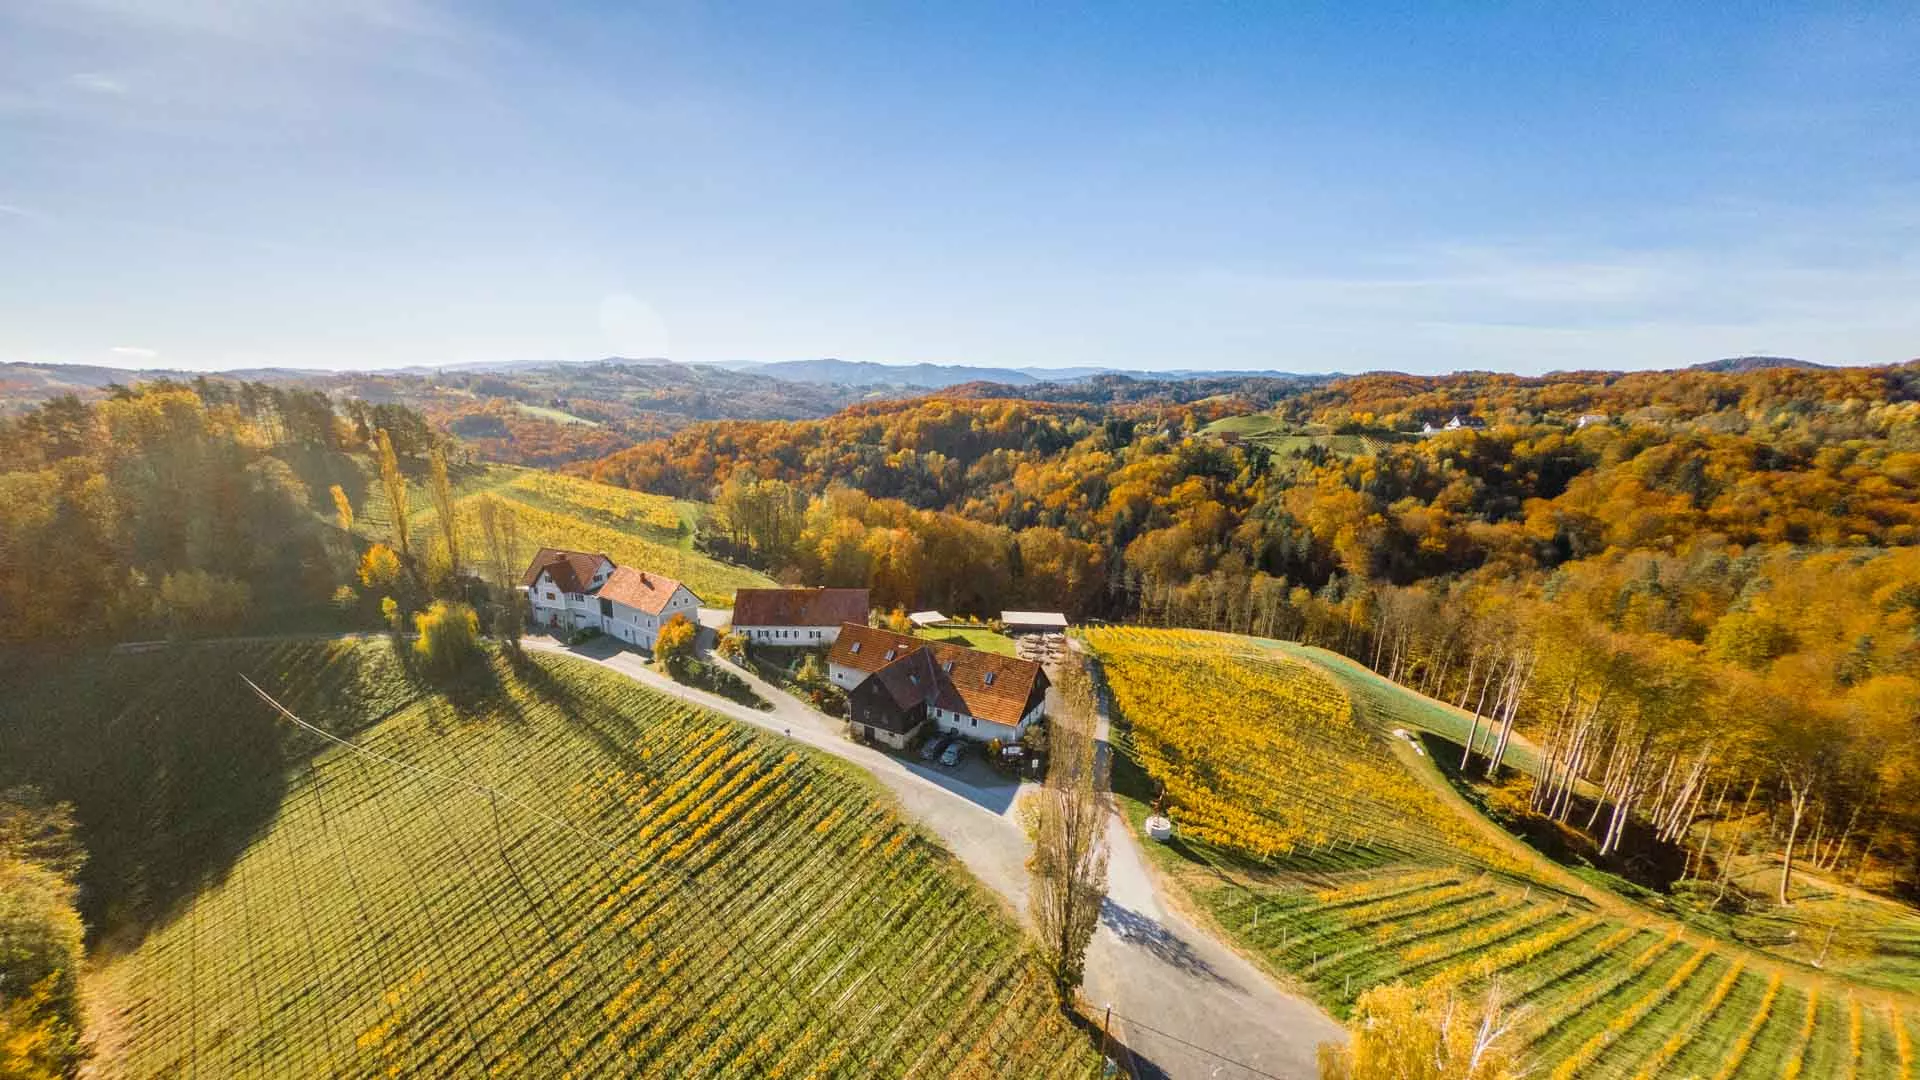 Warth Winery in Germany, Europe | Wineries - Rated 0.9